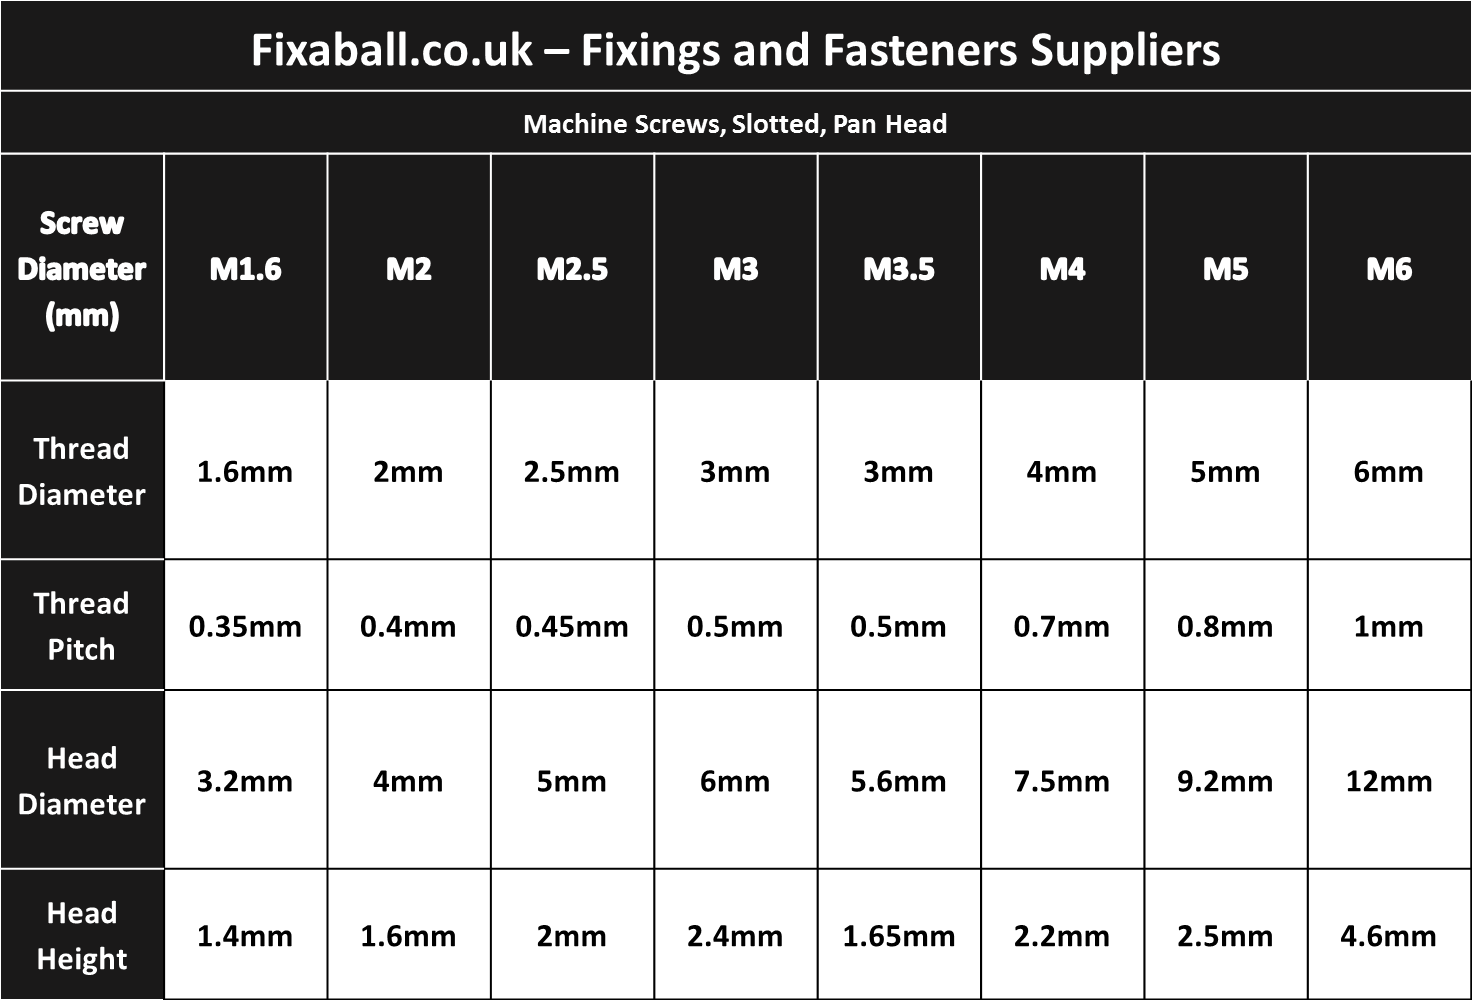 M4 Machine Screws Slotted Pan Head Brass DIN 85 - Fixaball Ltd. Fixings and Fasteners UK